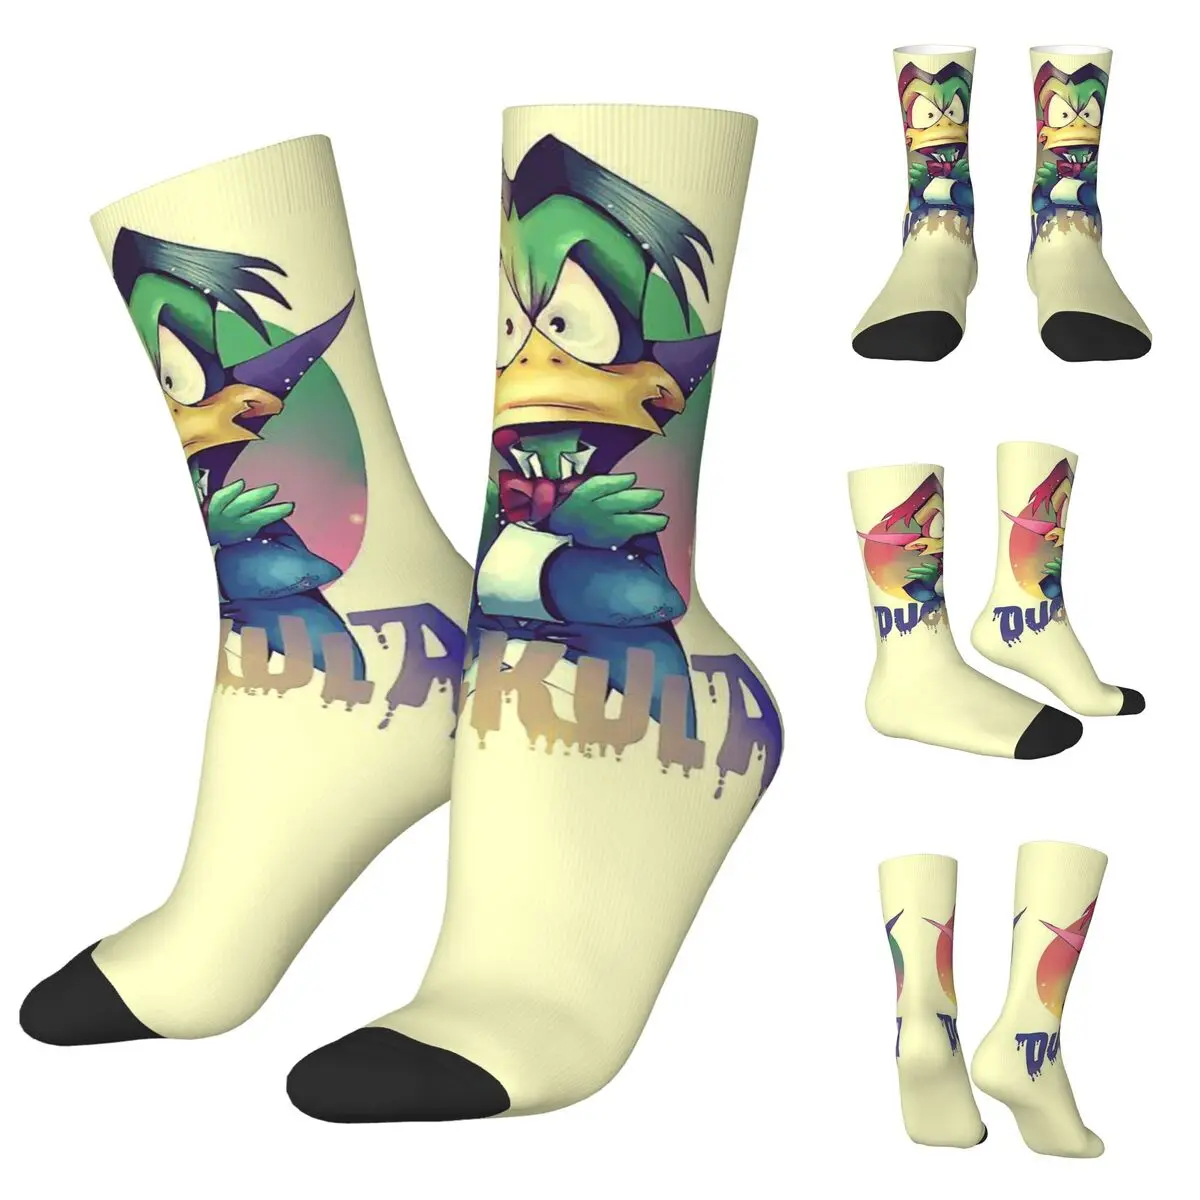 Count Duckula Vampire Lord The Castle Straight cosy Unisex Socks,Running Happy 3D printing Socks,Street Style Crazy Sock count duckula vampire lord the castle straight cosy unisex socks running happy 3d printing socks street style crazy sock